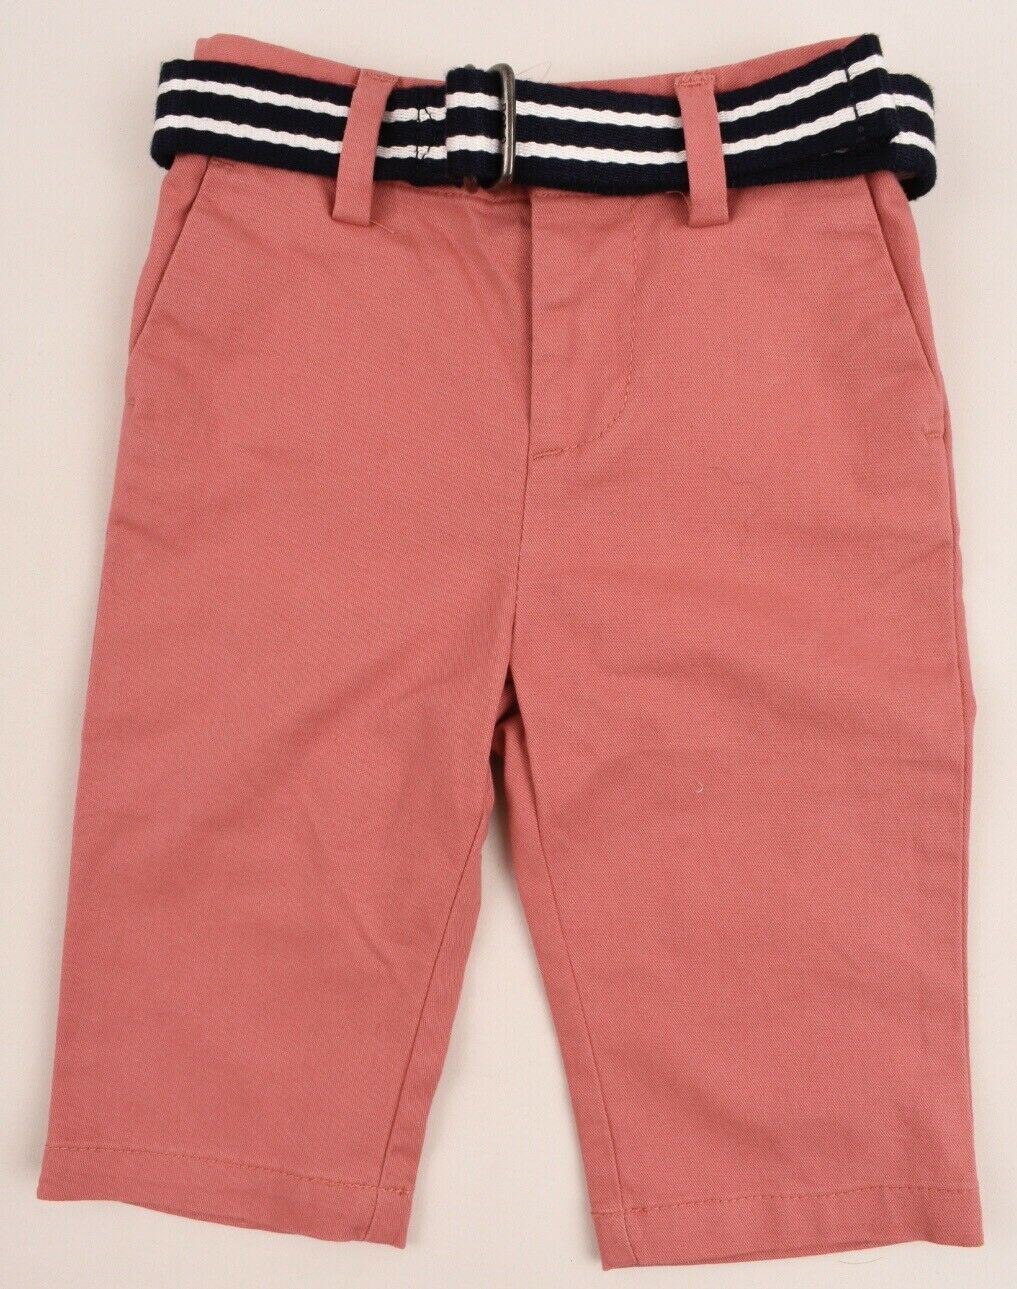 RALPH LAUREN Baby Boys Belted Chino Shorts Dusty Red size 3 months size 6 months